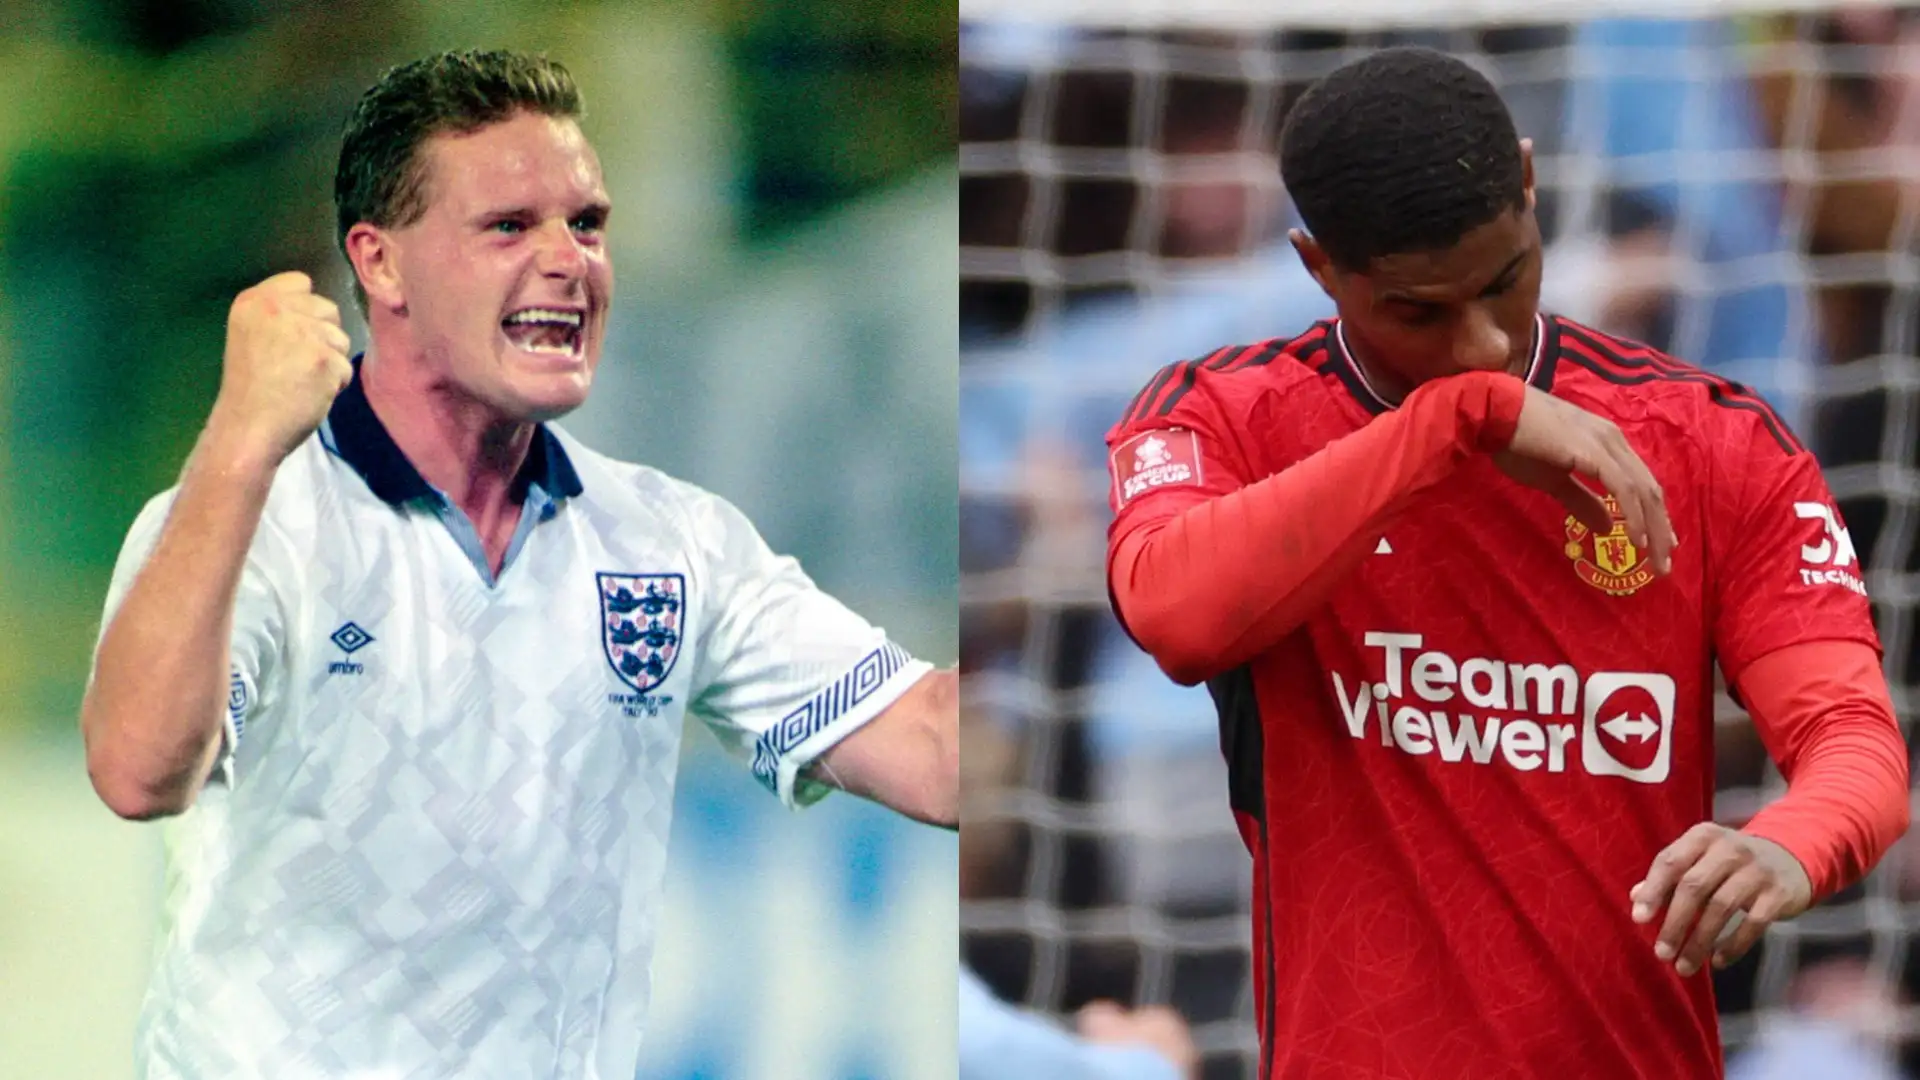 'It's sad to see' - Marcus Rashford compared to Paul Gascoigne as Man United ace is hit with stinging reality after England snub